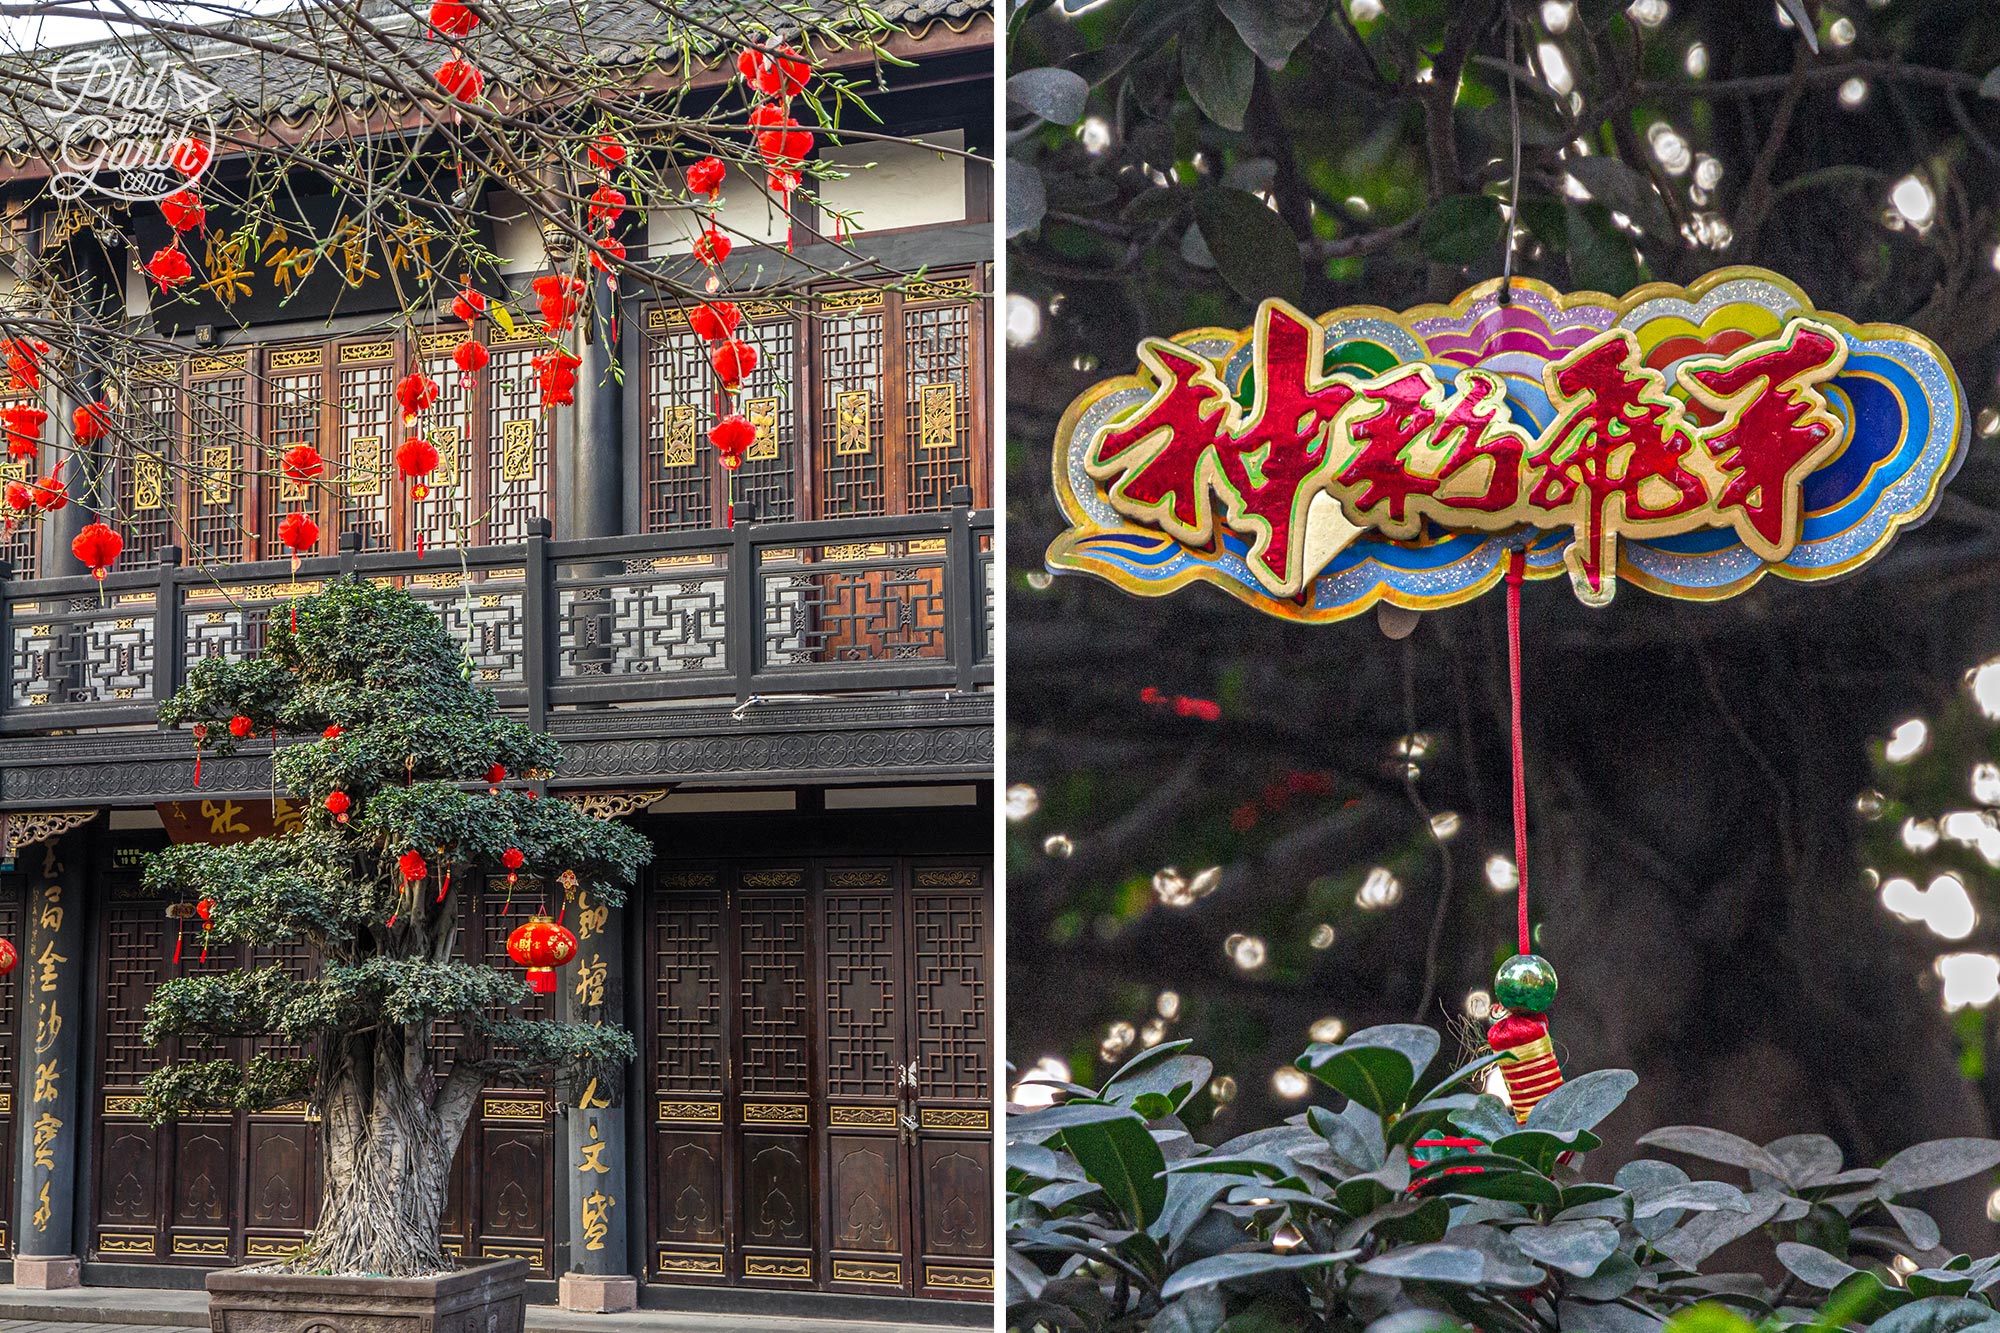 Highly decorated trees in Chengdu China